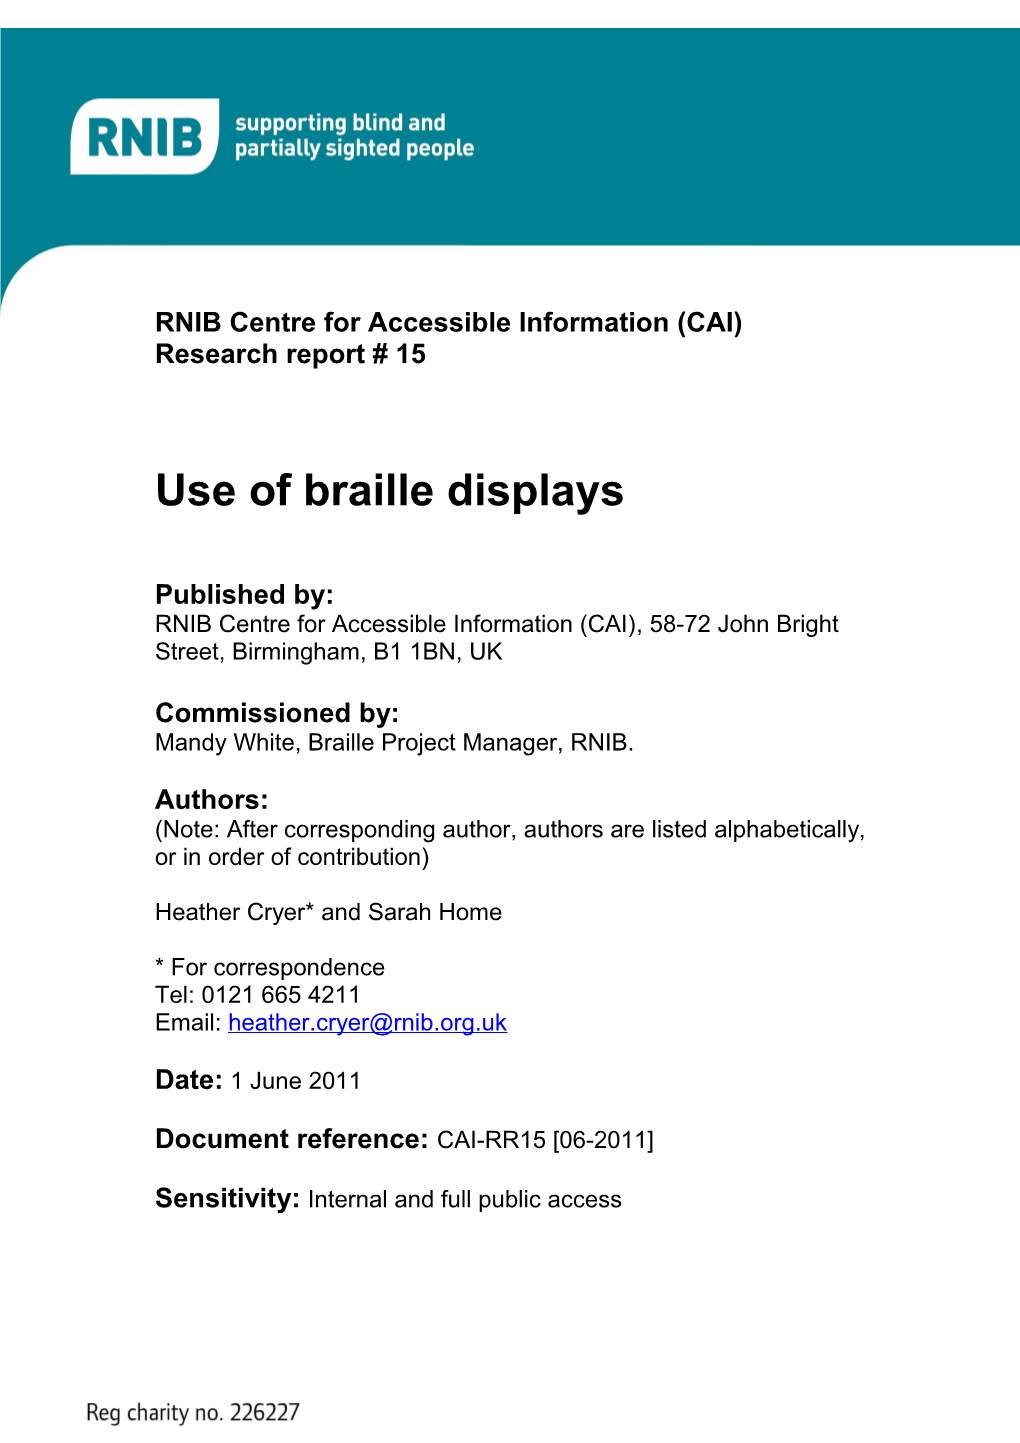 Use of Braille Displays